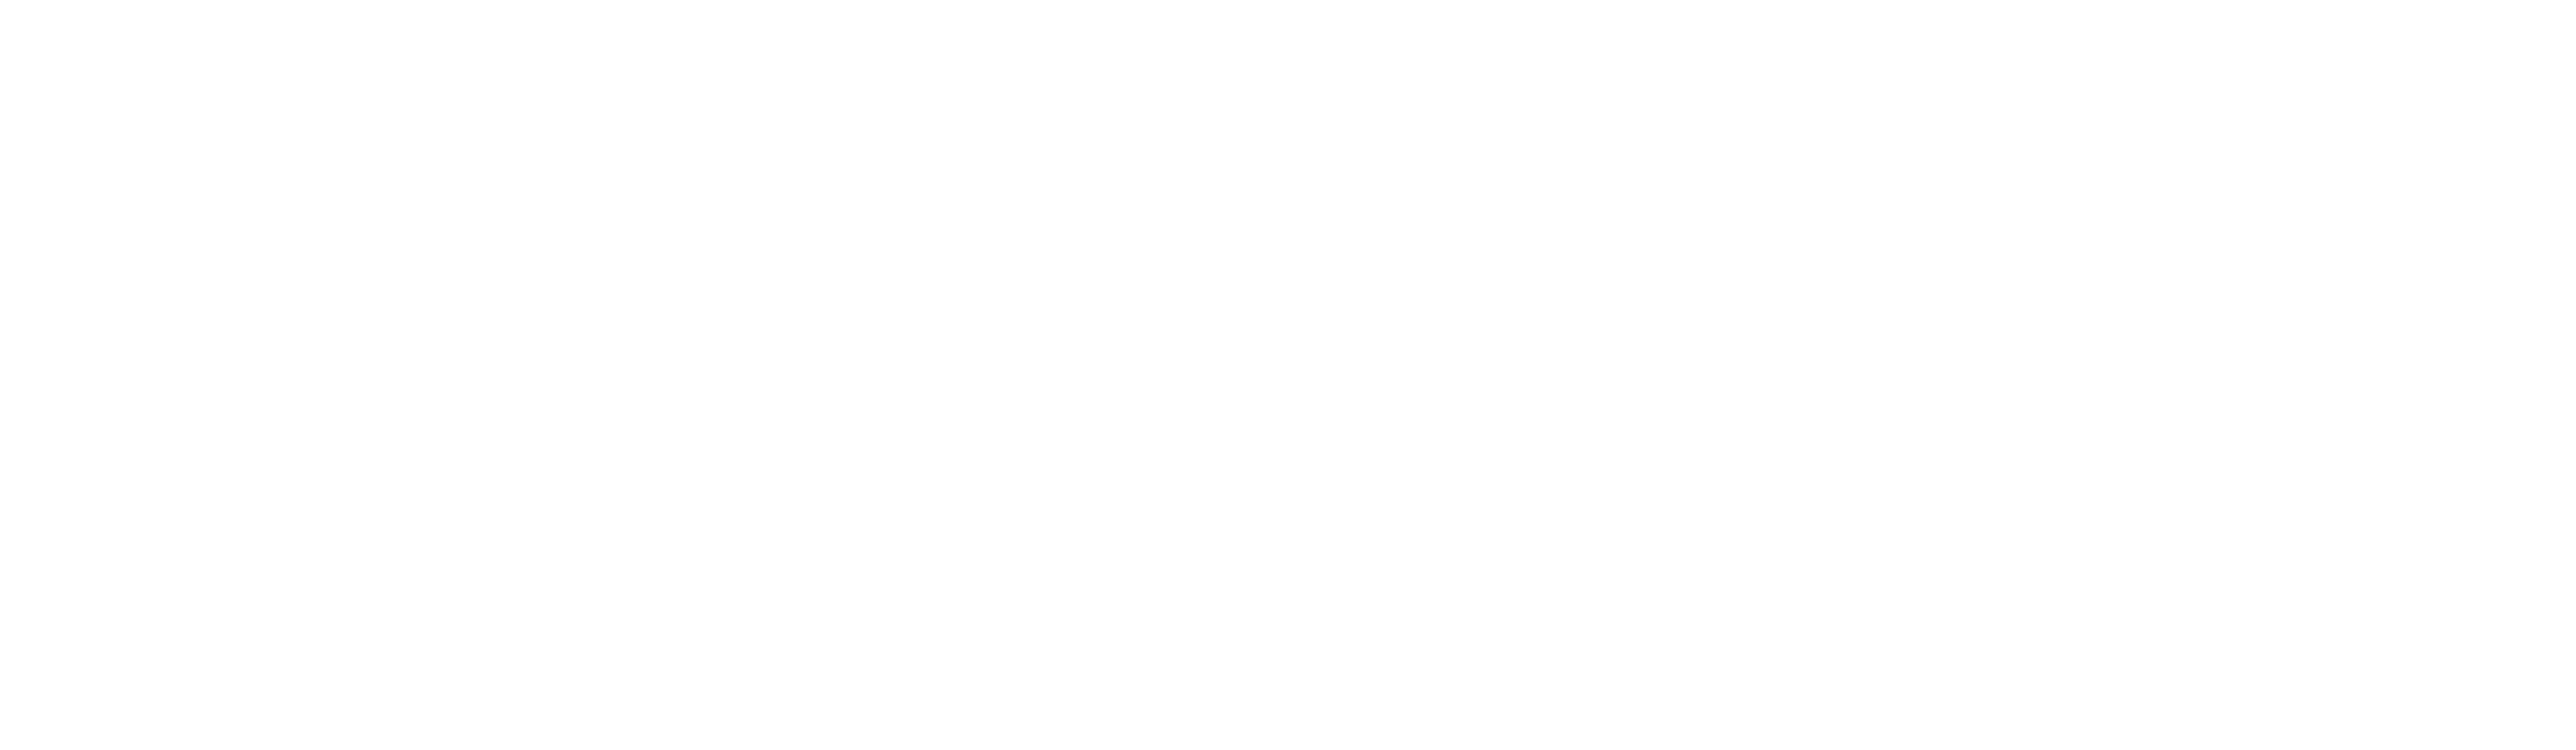 Events @ 522